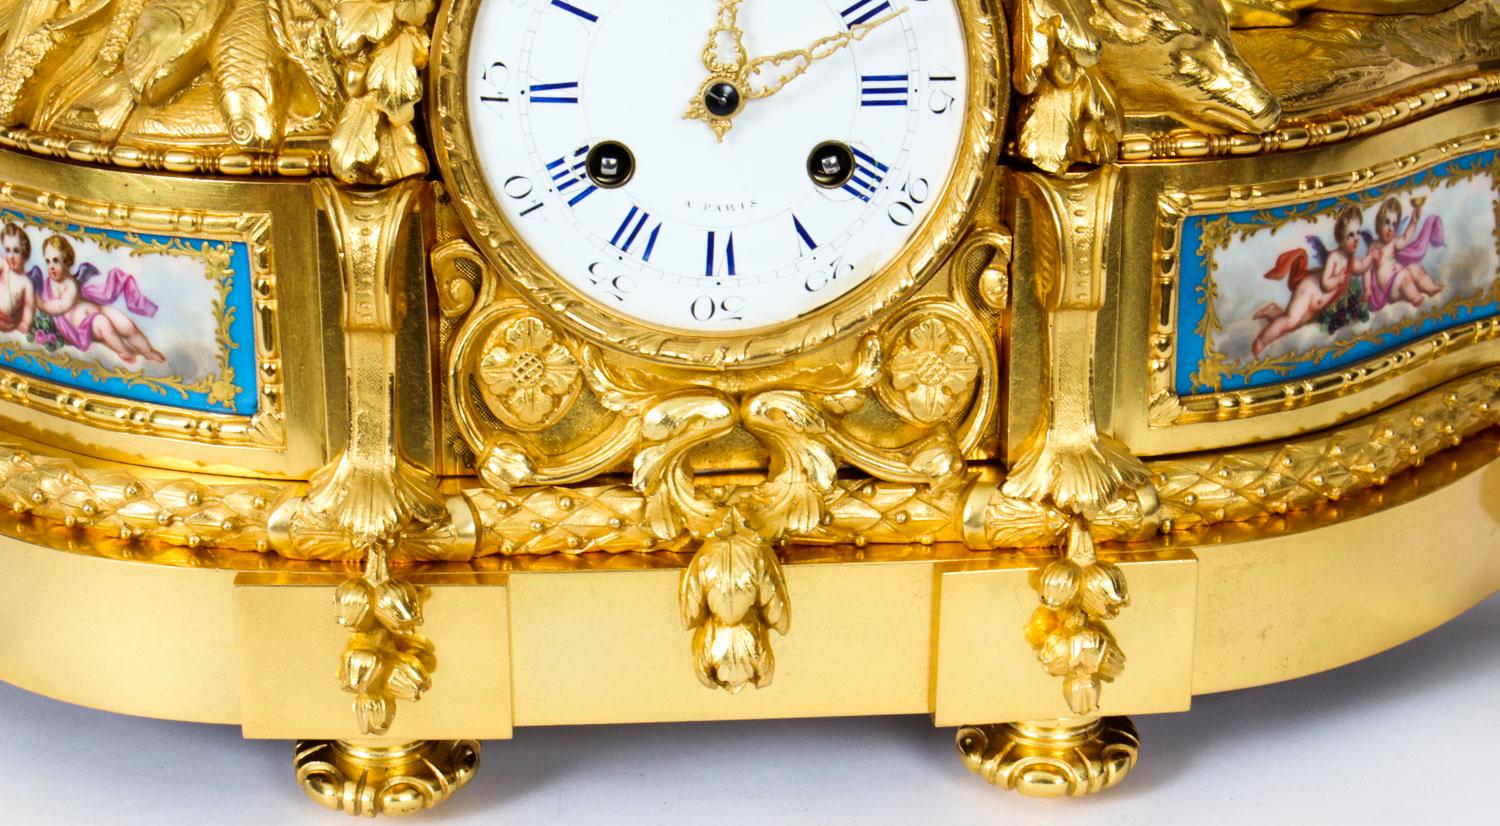 Antique French Sevres Porcelain Ormolu Clock by Raingo Freres, 19th Century In Good Condition For Sale In London, GB